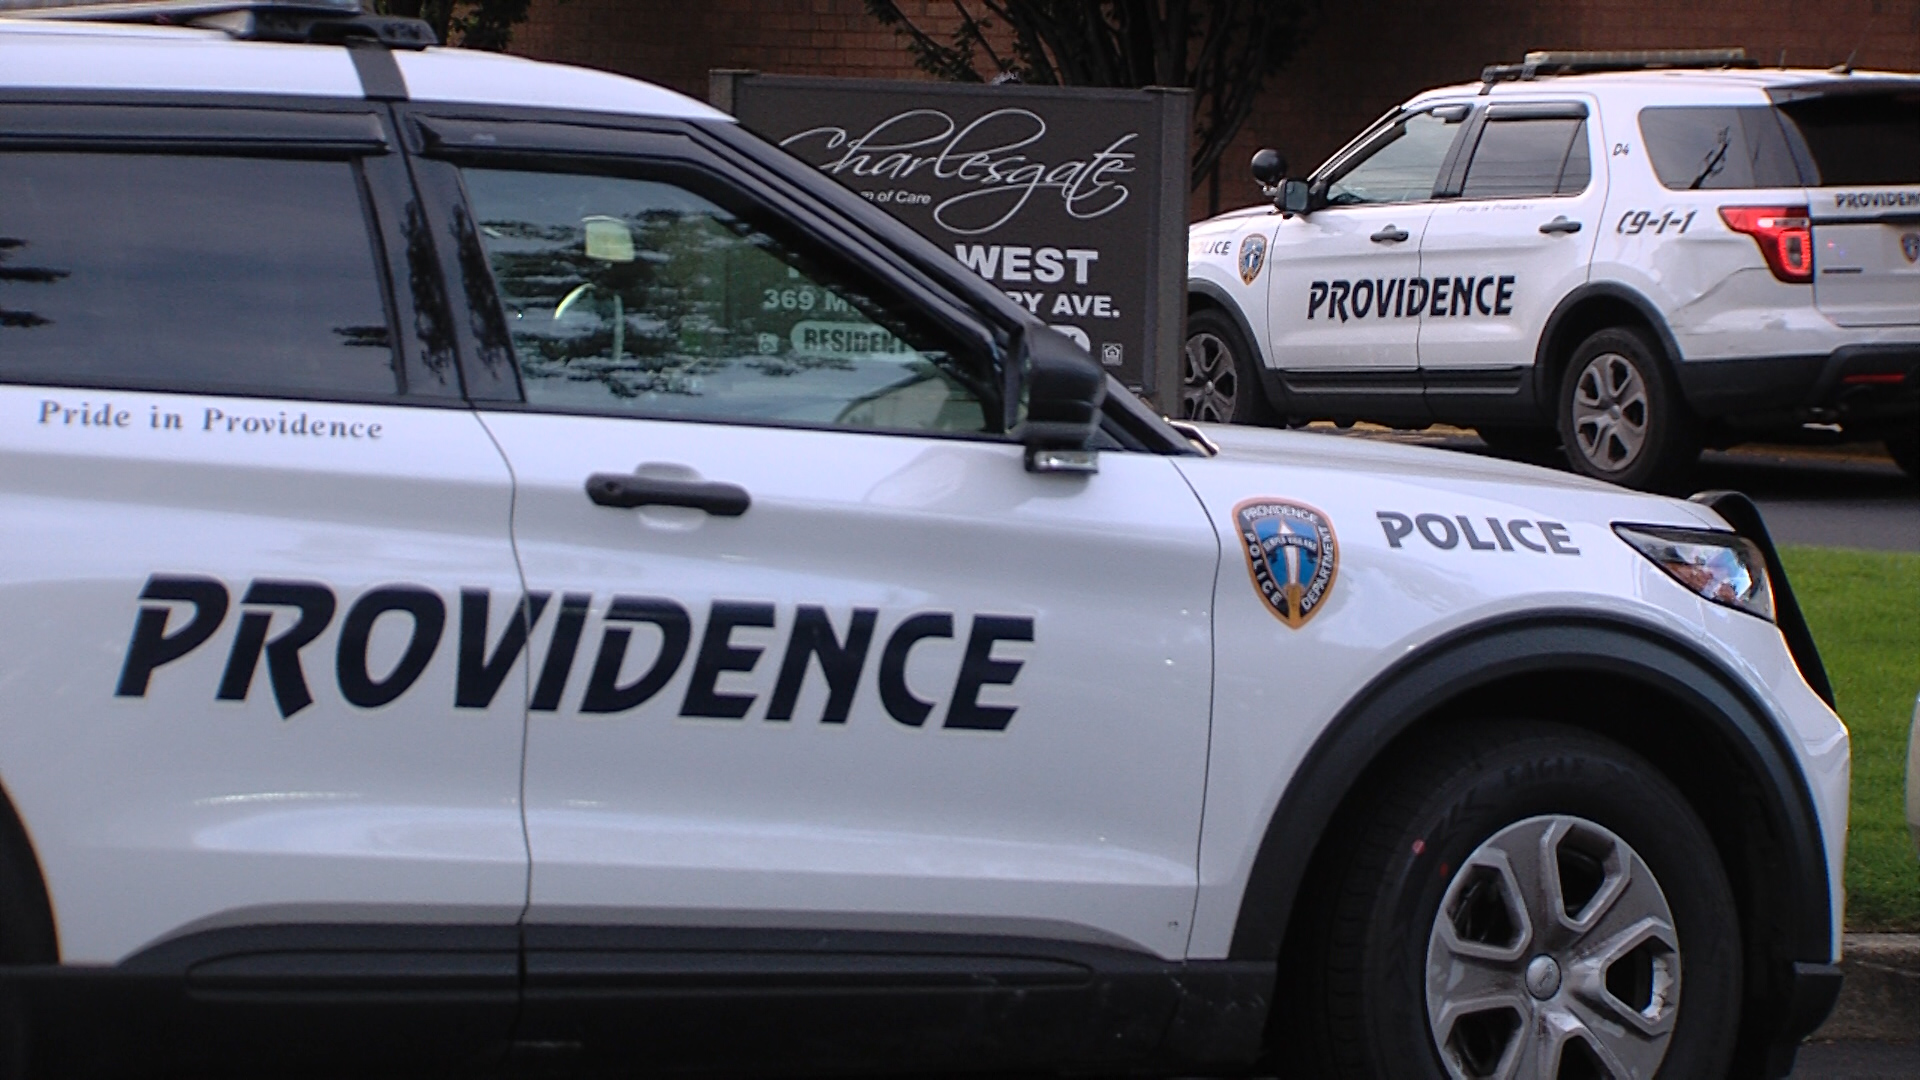 Man hospitalized after stabbing in Providence